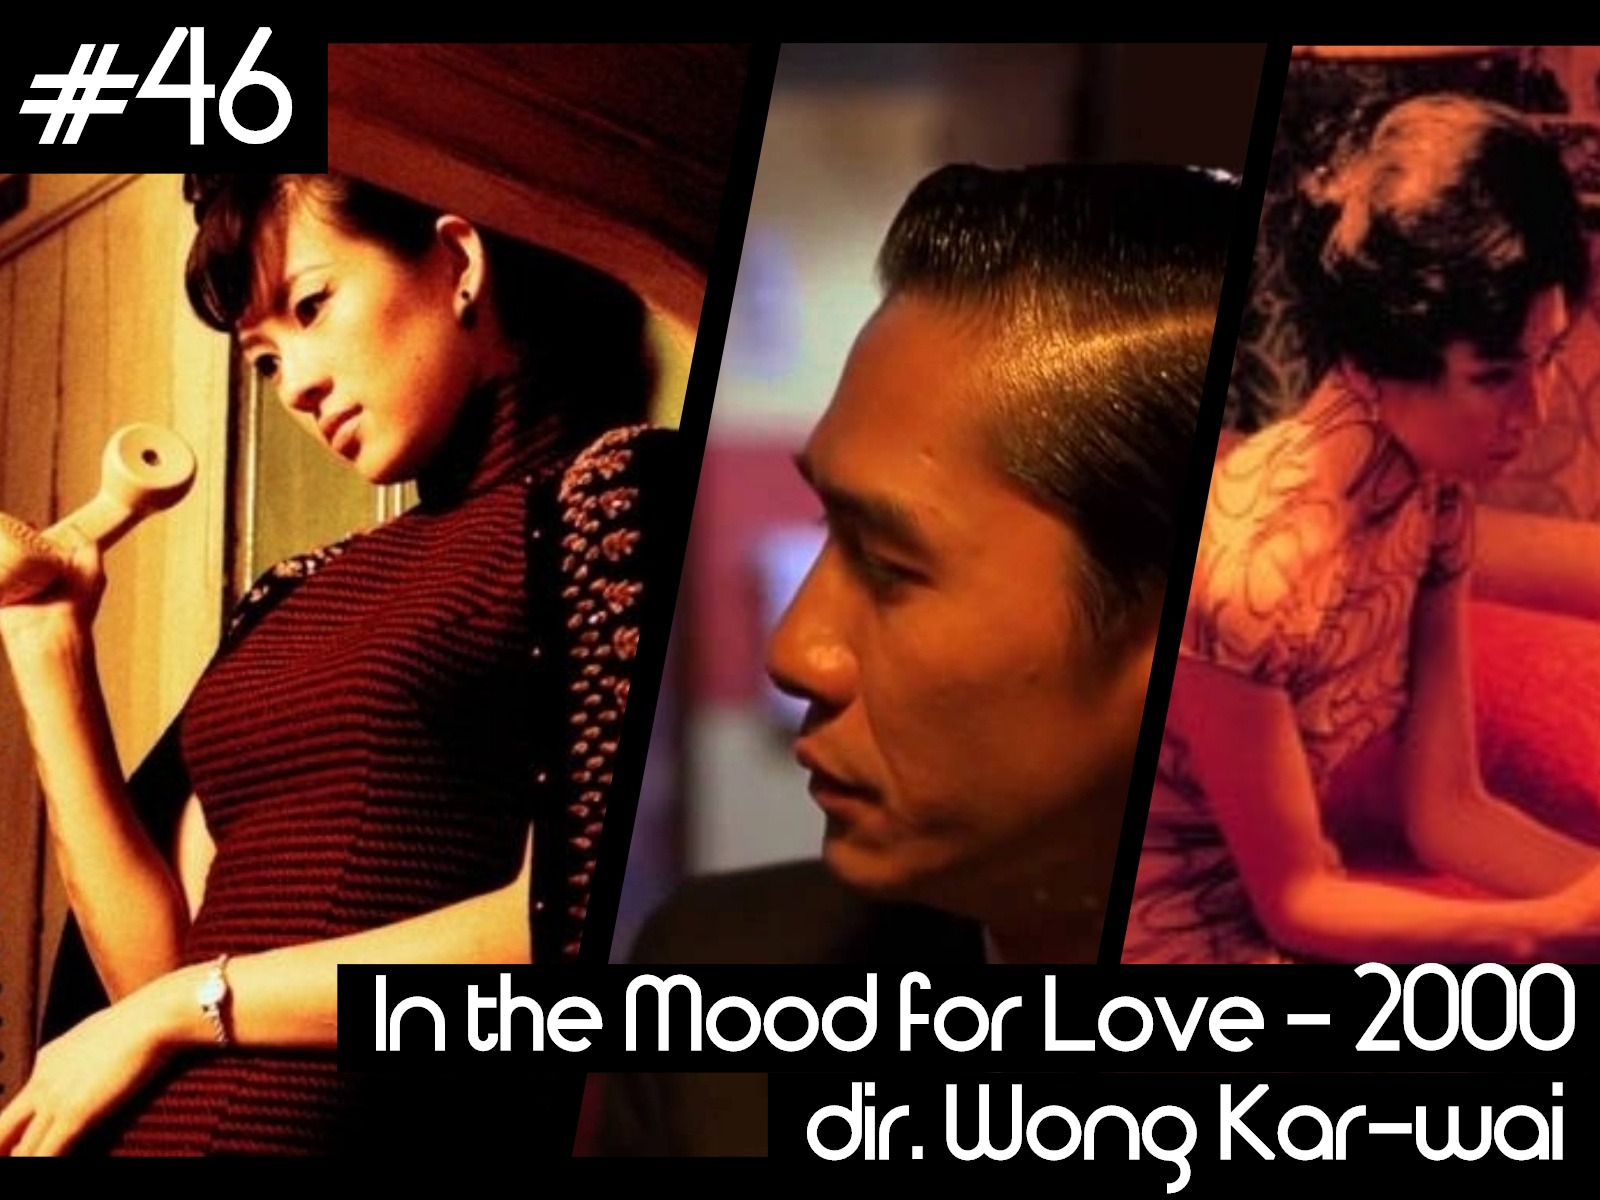 46 - in the mood for love.jpg